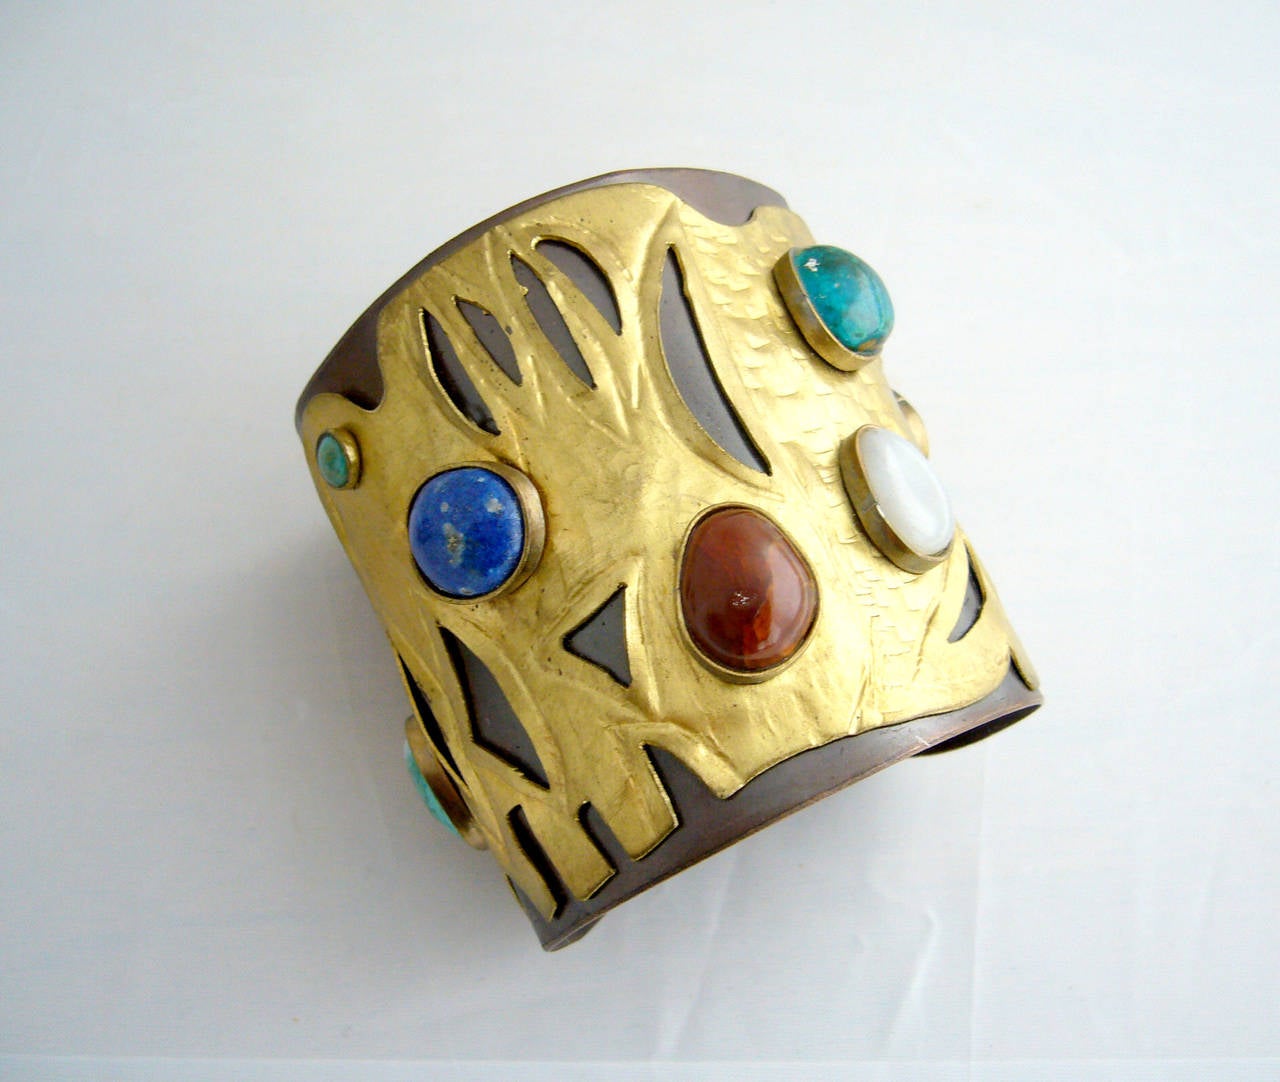 A handmade bracelet comprised of a uniquely hammered brass plate mounted on copper featuring nine semi-precious gemstones which include lapis, malachite and what appears to be agate and quartz by Juan Reyes of Chile. Cuff measures 3